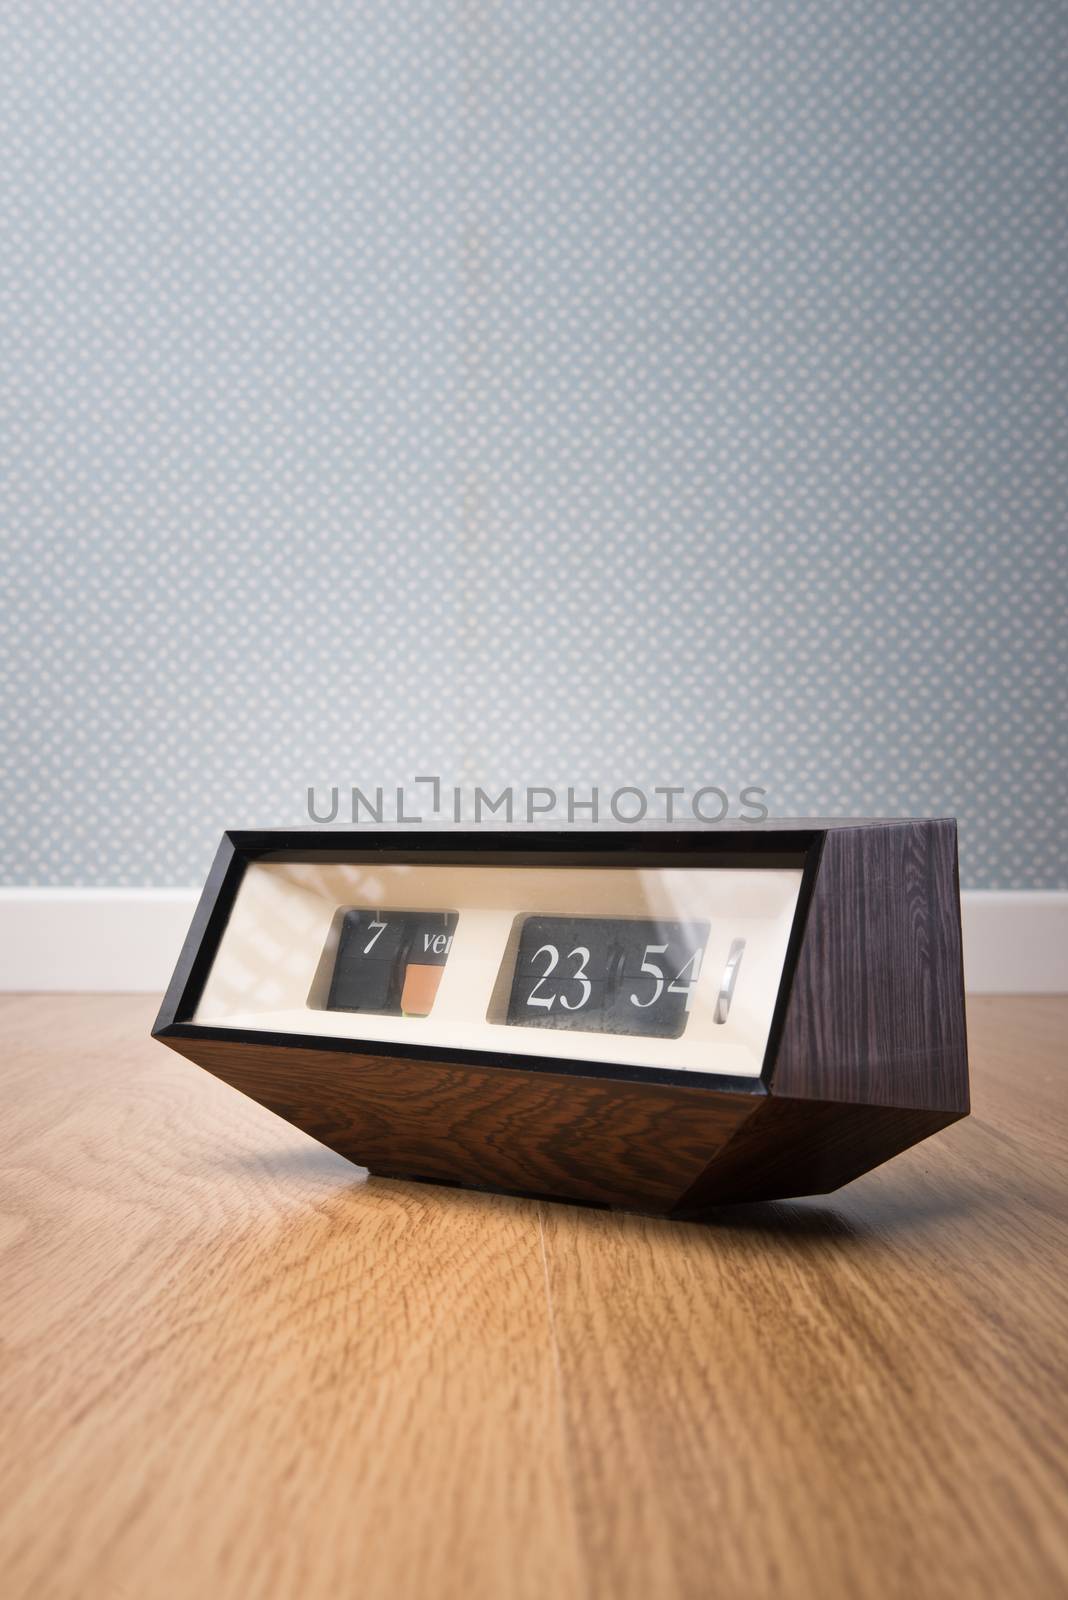 Vintage edgy clock on wooden surface with vintage dotted wallpaper on background.